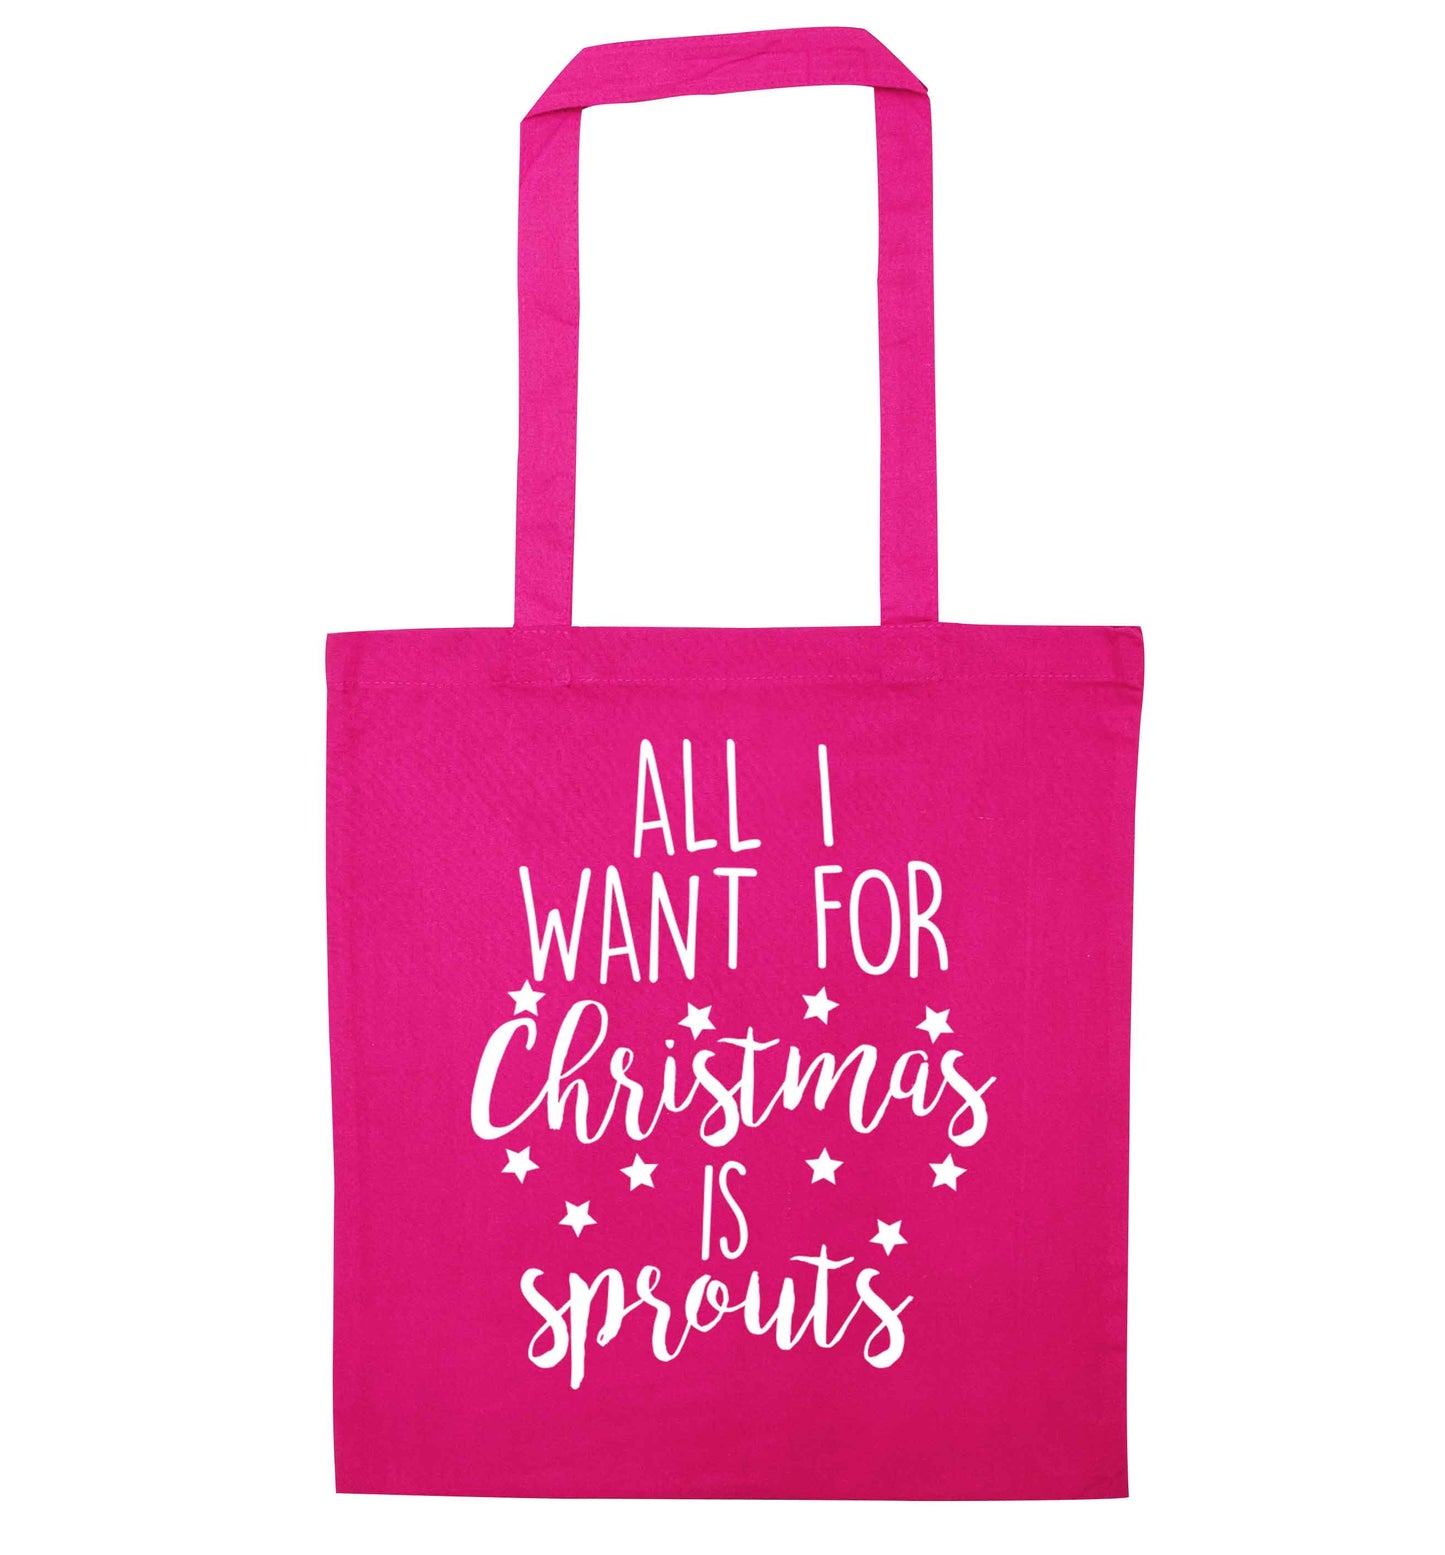 All I want for Christmas is sprouts pink tote bag